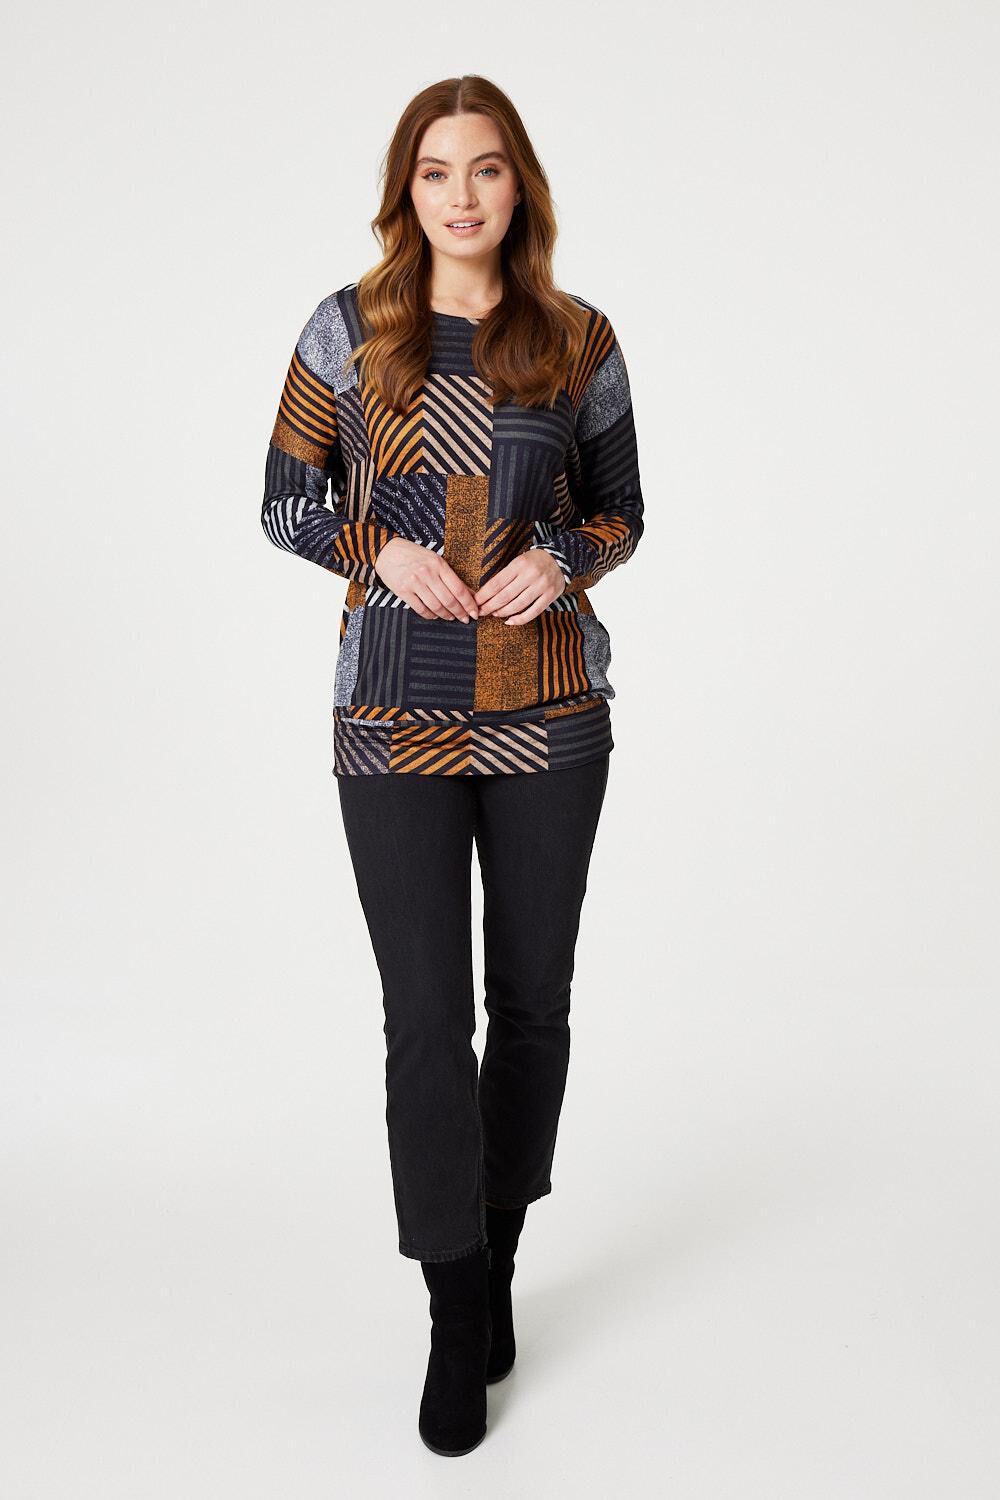 Izabel London Brown - Patchwork Print Relaxed Fit Top, Size: 14